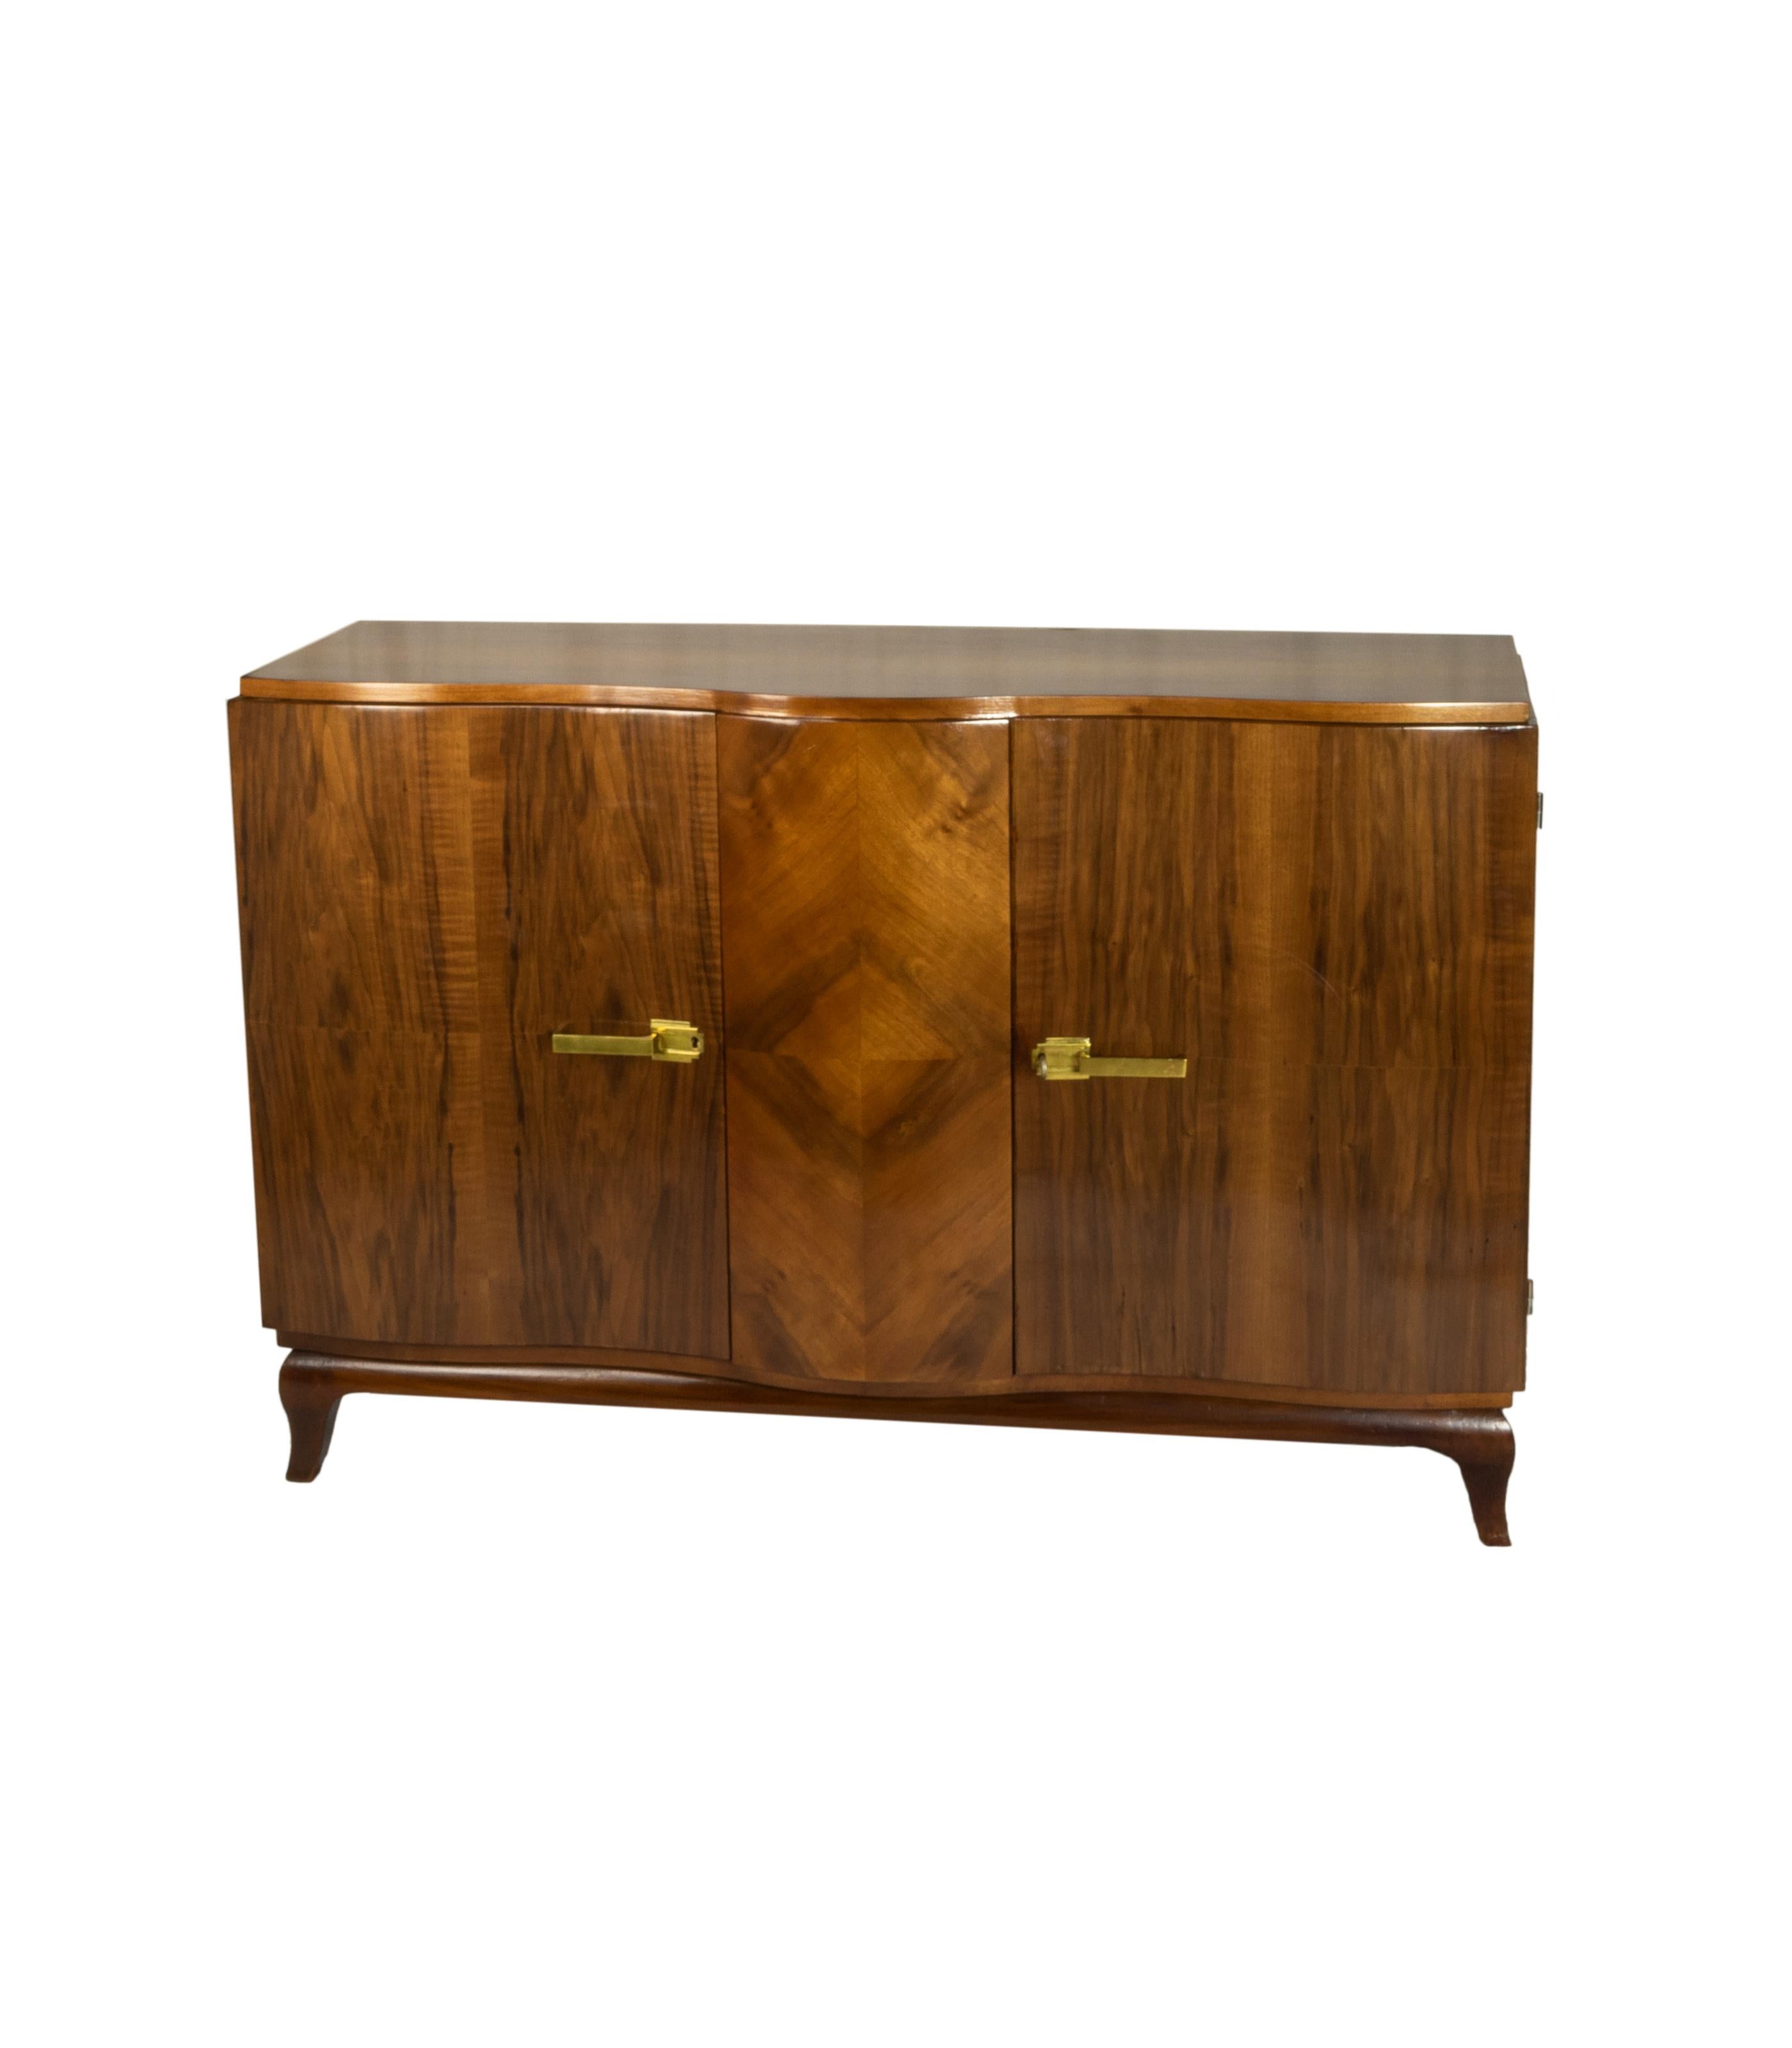  Belgian Art Deco Sideboard, Walnut 20th Century In Good Condition For Sale In Lisbon, PT